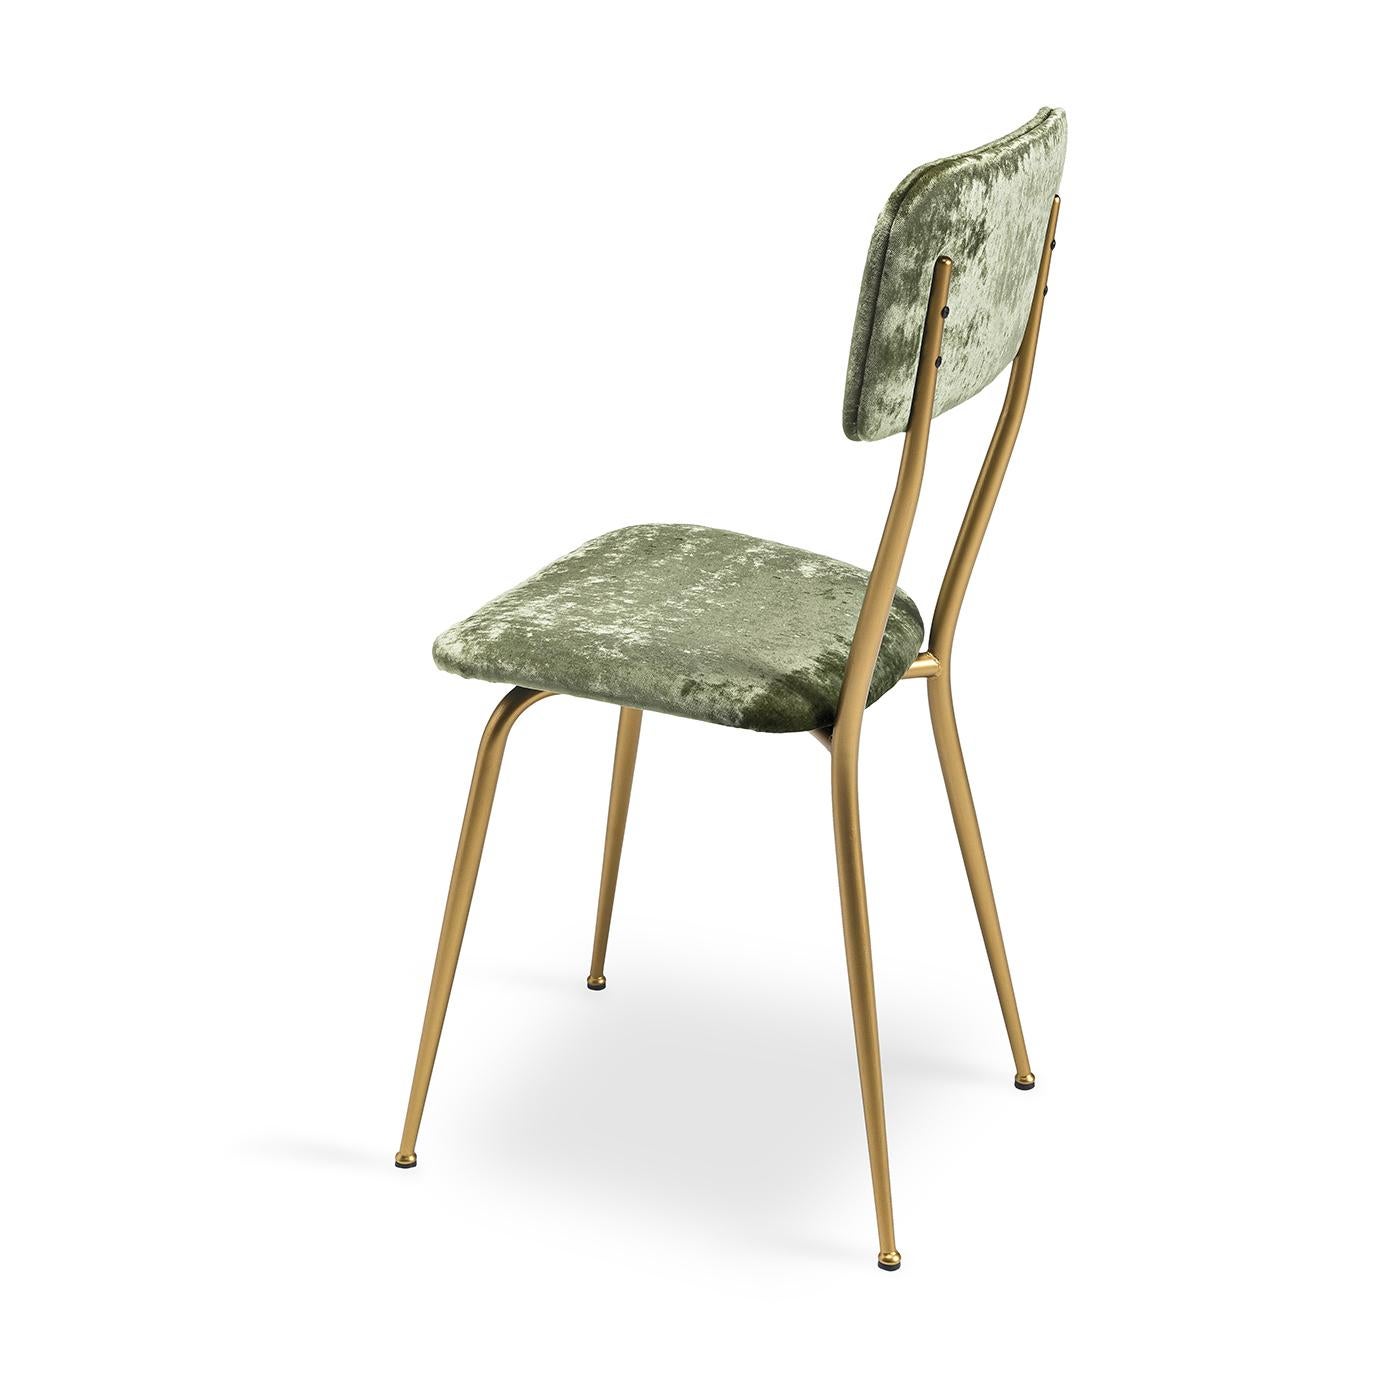 Transform your living space with the sleek lines and effortless beauty of the Miss Ava 8 Chair. Its padded seat and backrest are upholstered in luxurious mint velvet fabric, whilst its clean metal frame showcases a brushed brass finish. A harmonious